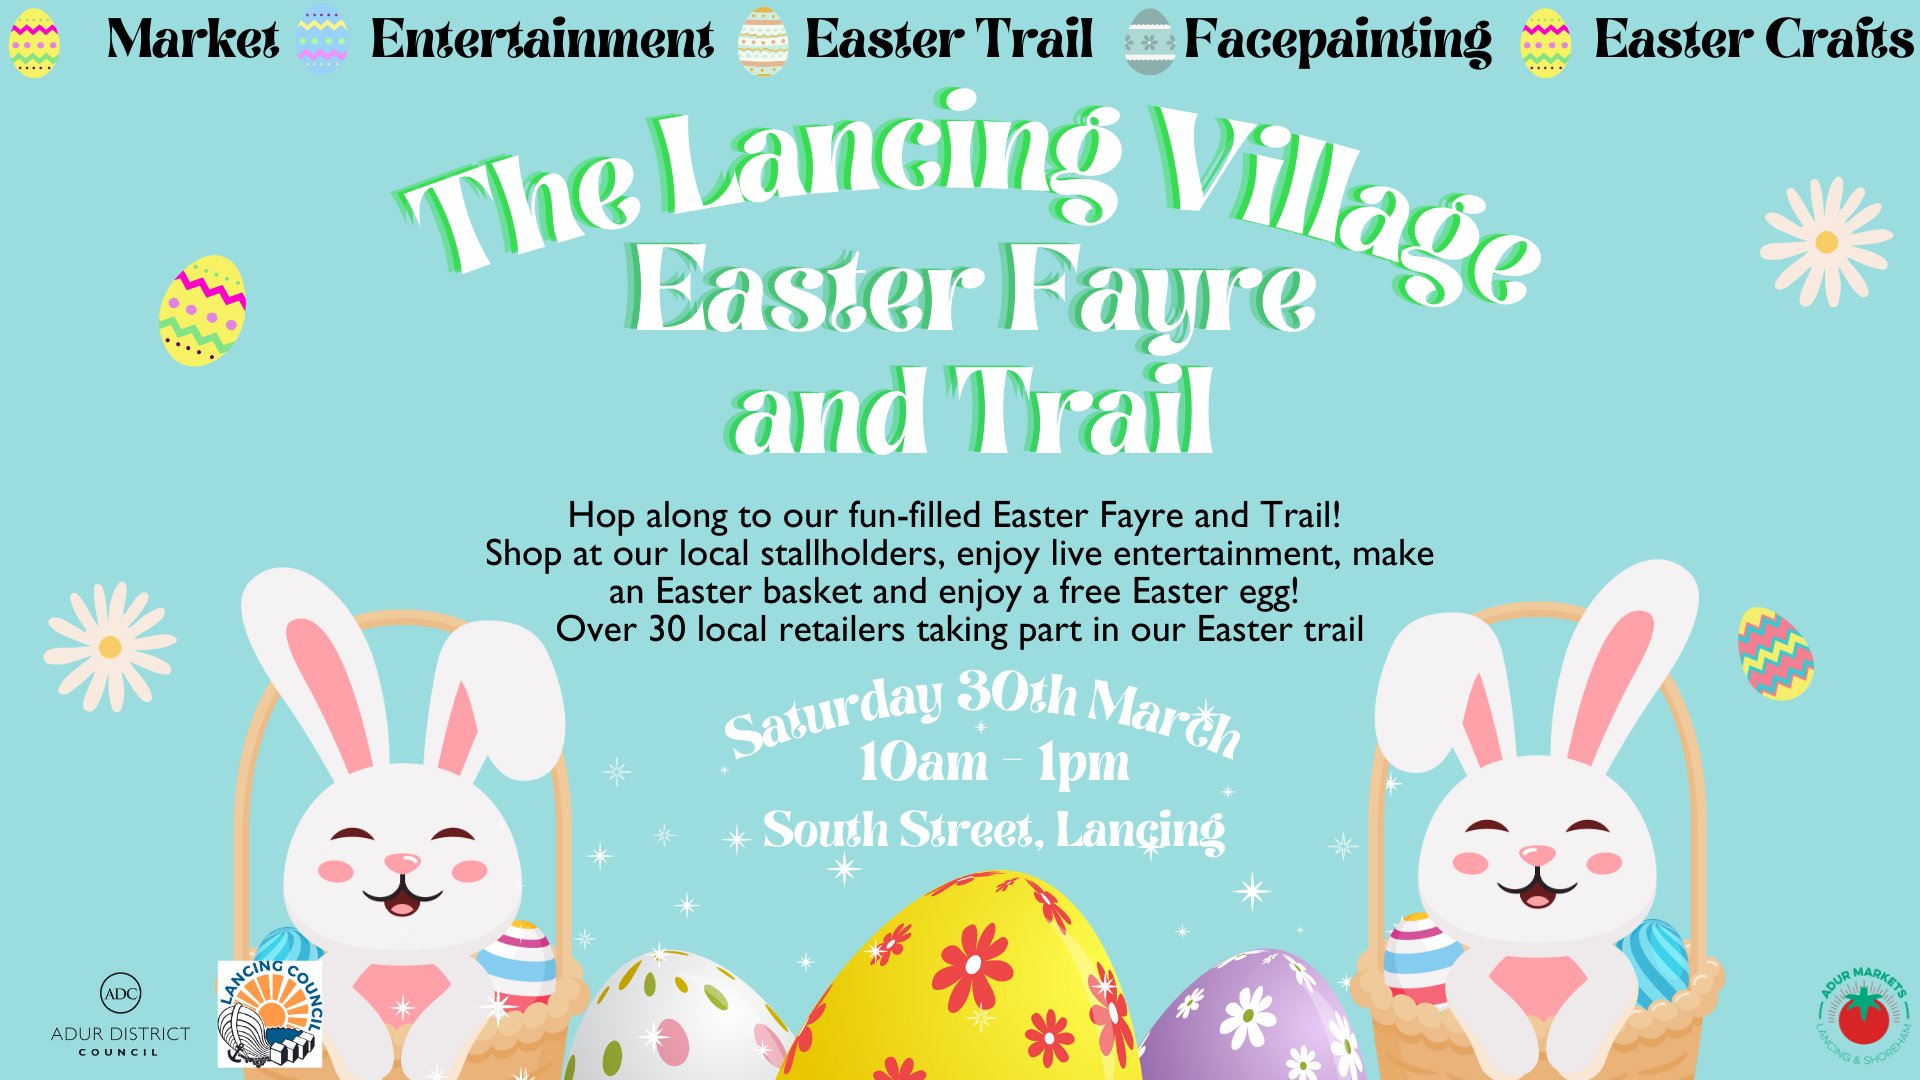 The Lancing Village Easter Fayre and Trail